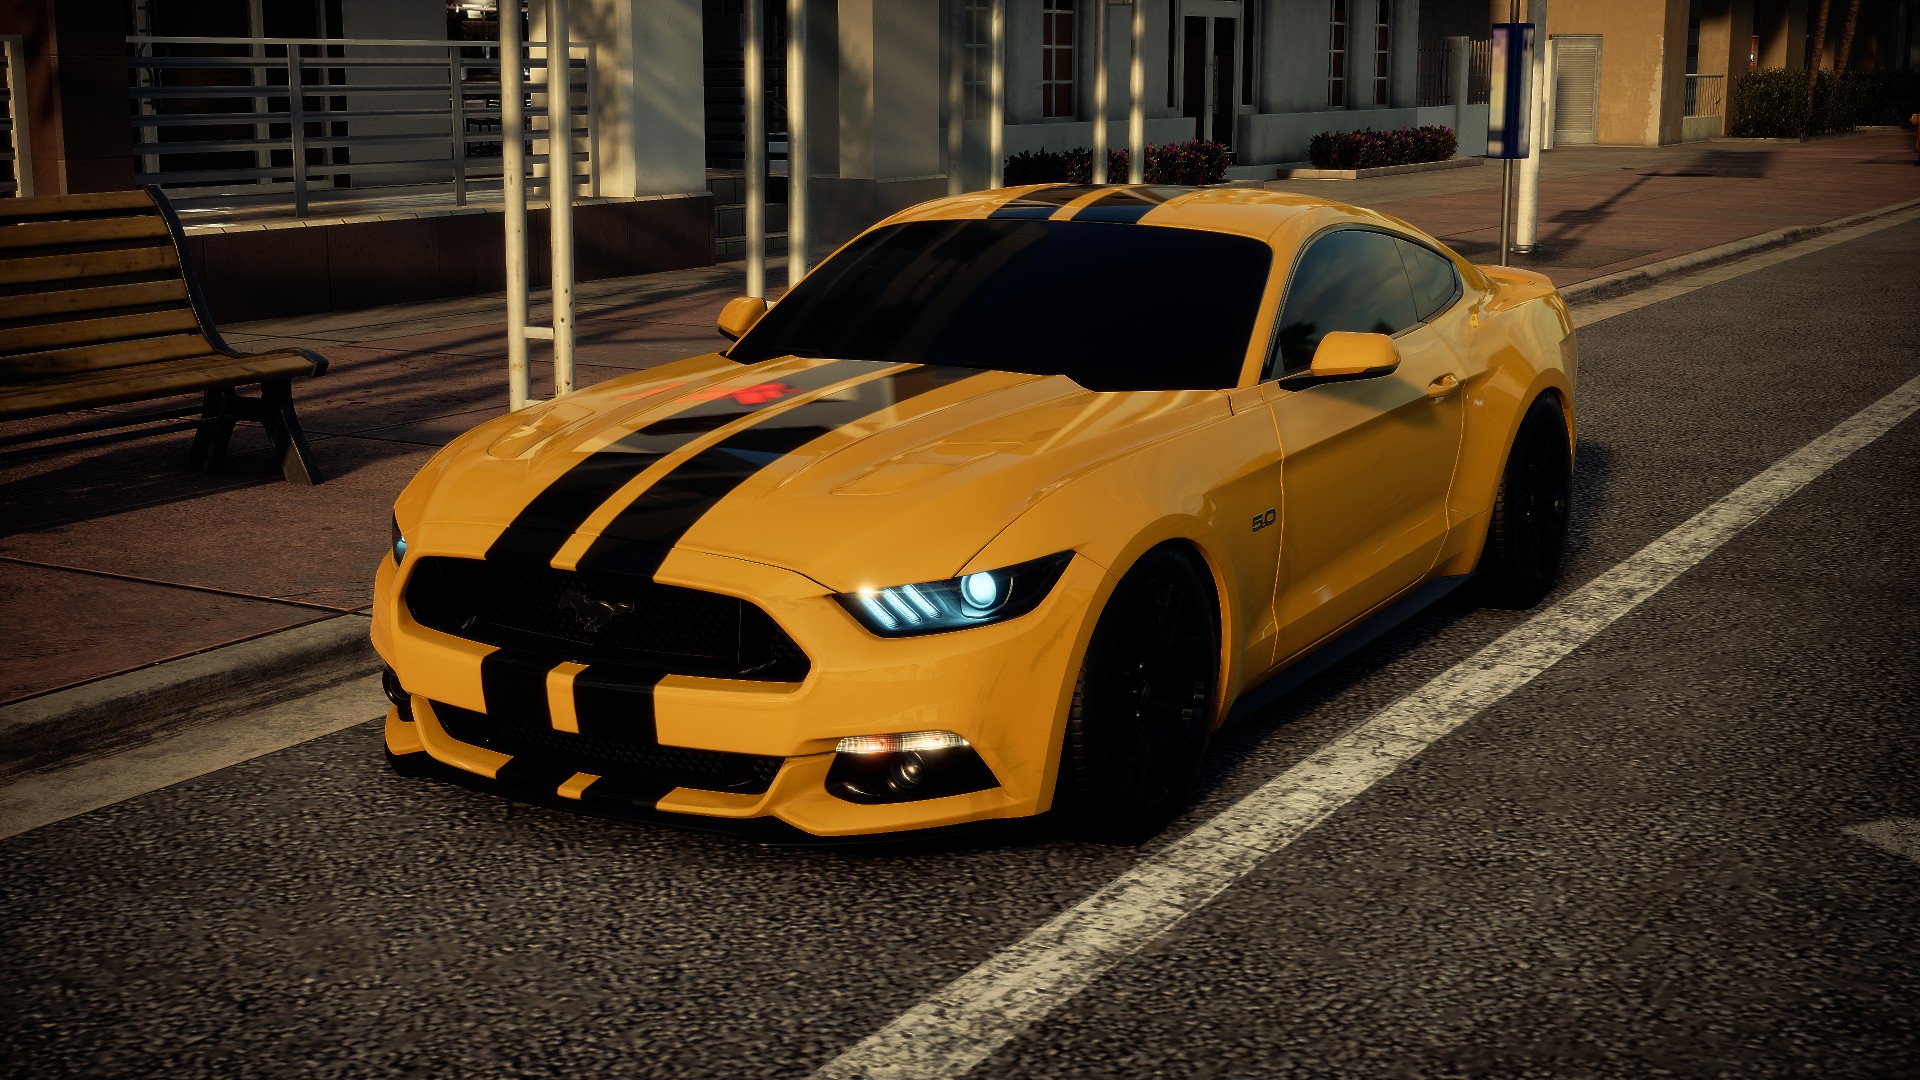 General 1920x1080 car 4K Ford Mustang S550 Ford muscle cars American cars racing stripes